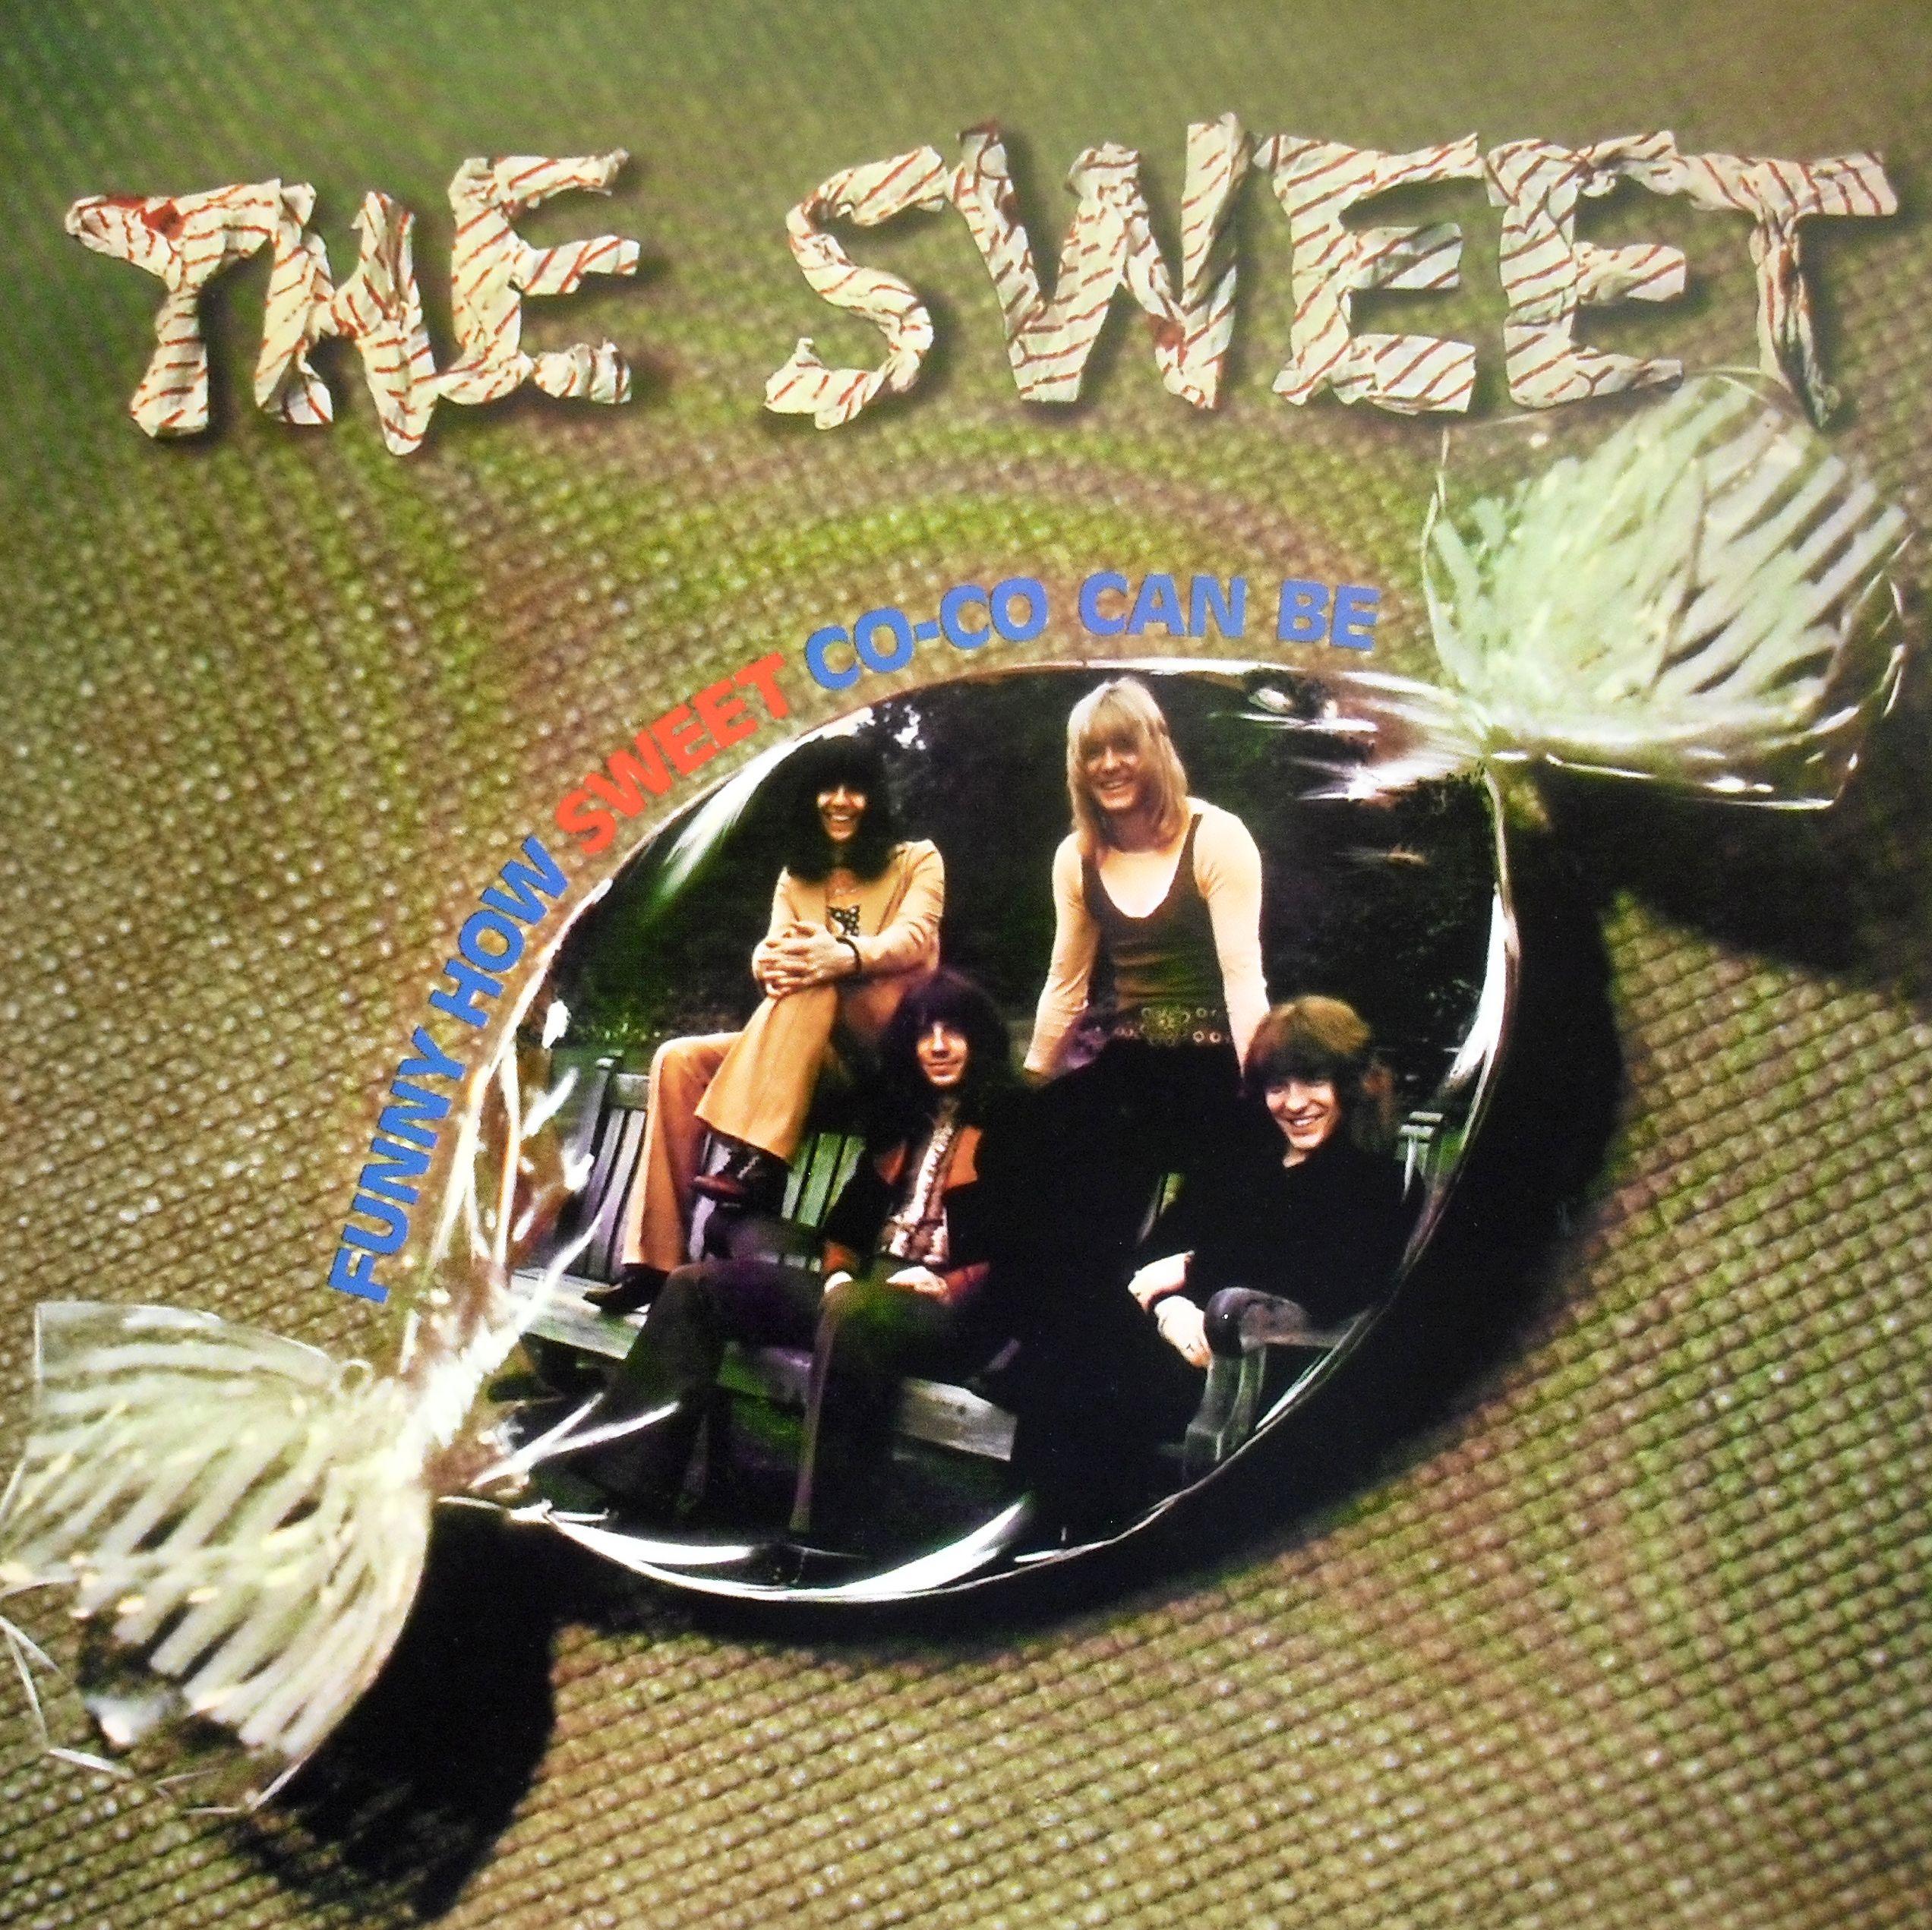 Sweet - Collection (Remastered 2017) ( Hard Rock) - Download for free